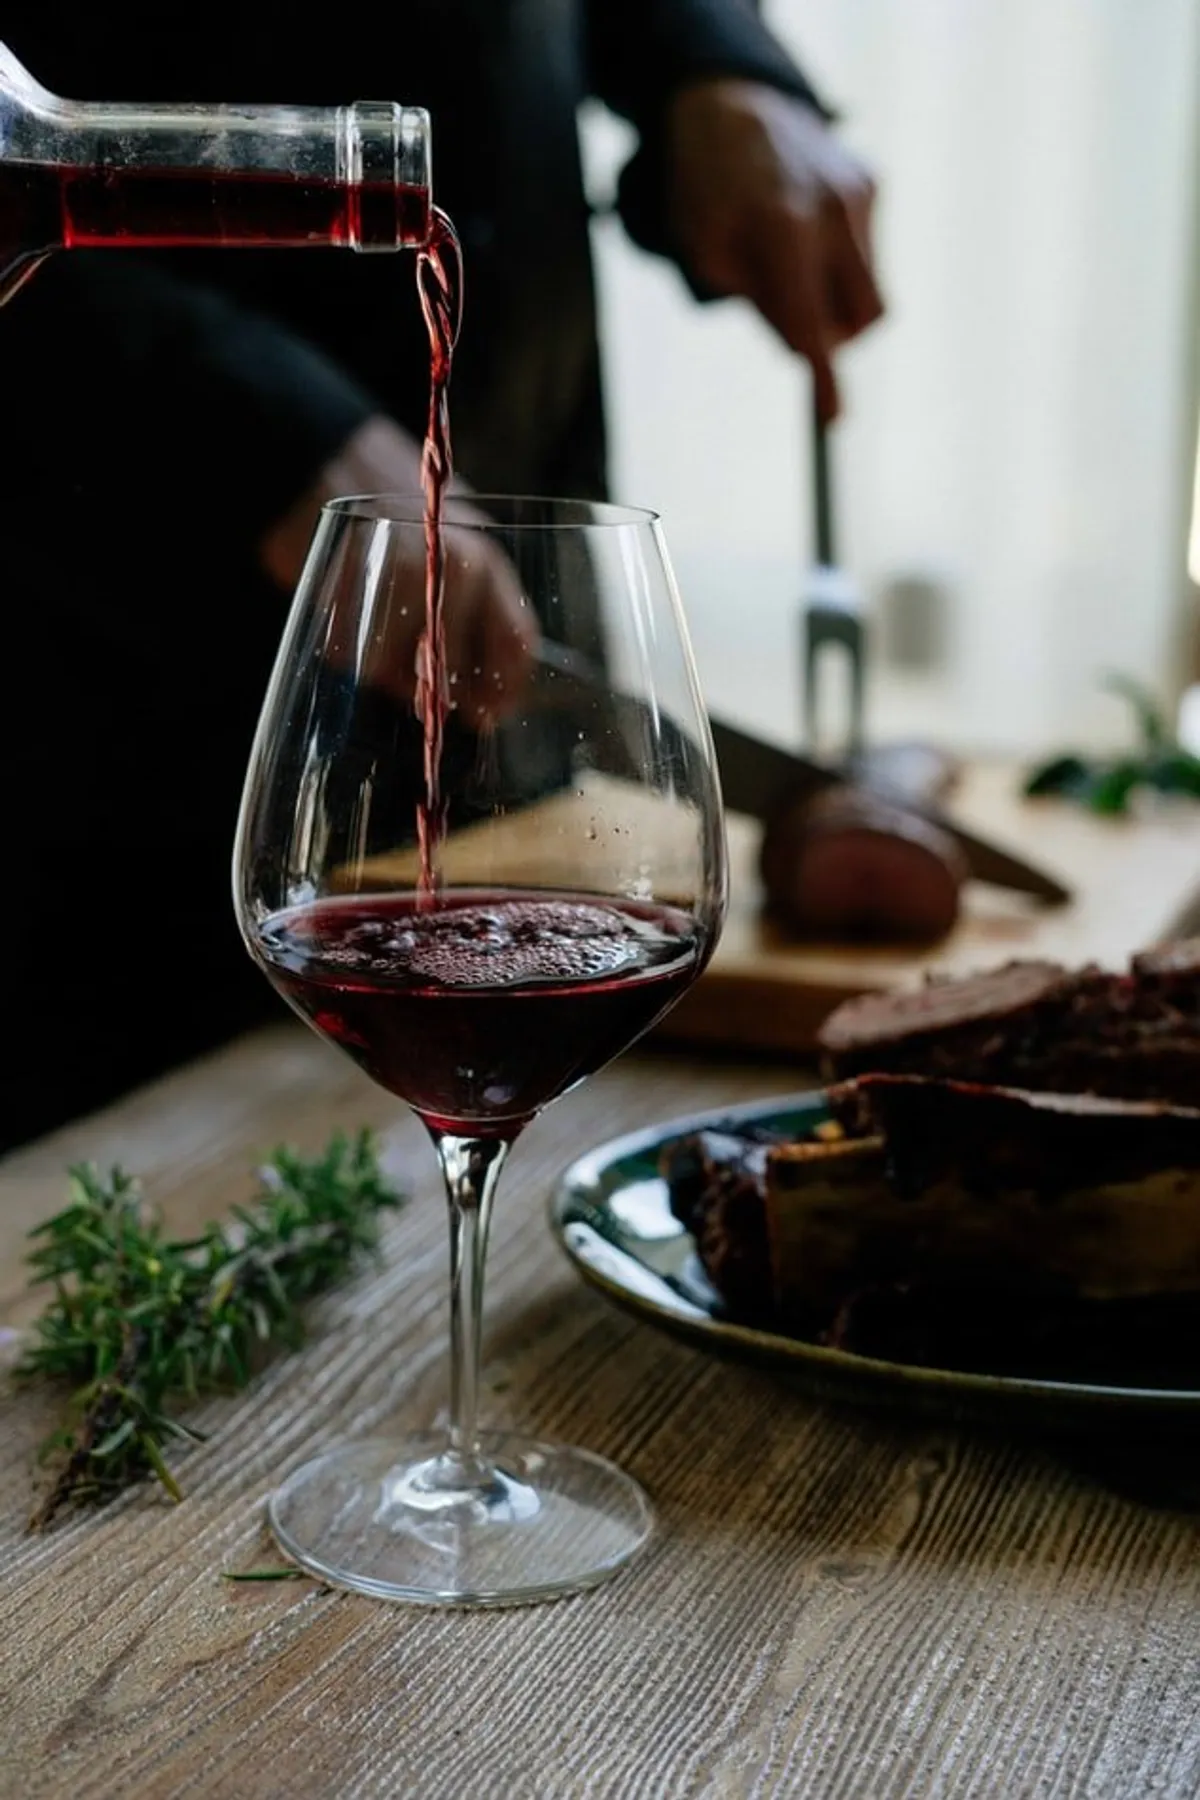 Pour a glass of red wine.  |  Source: Unsplash